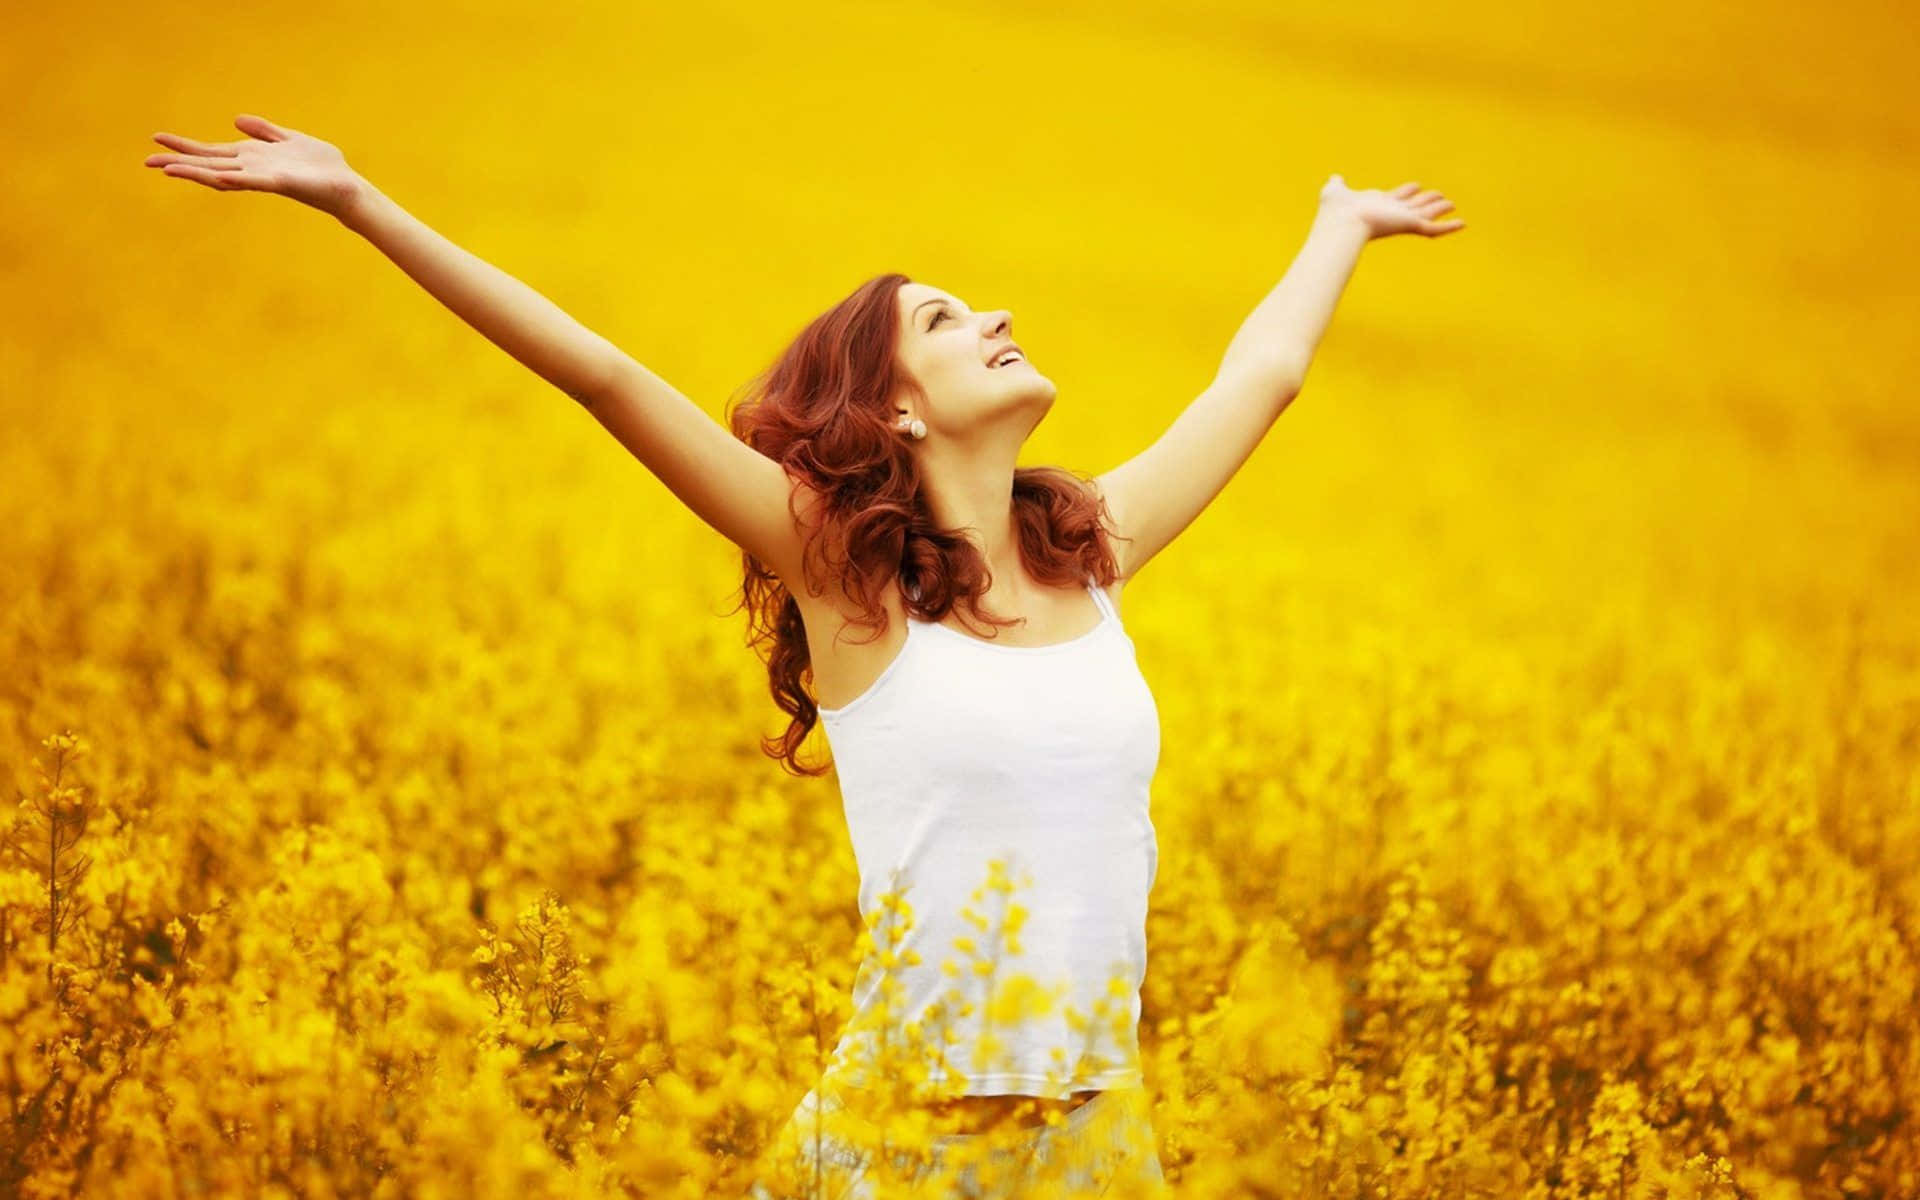 Tranquil woman enjoying contentment in nature Wallpaper